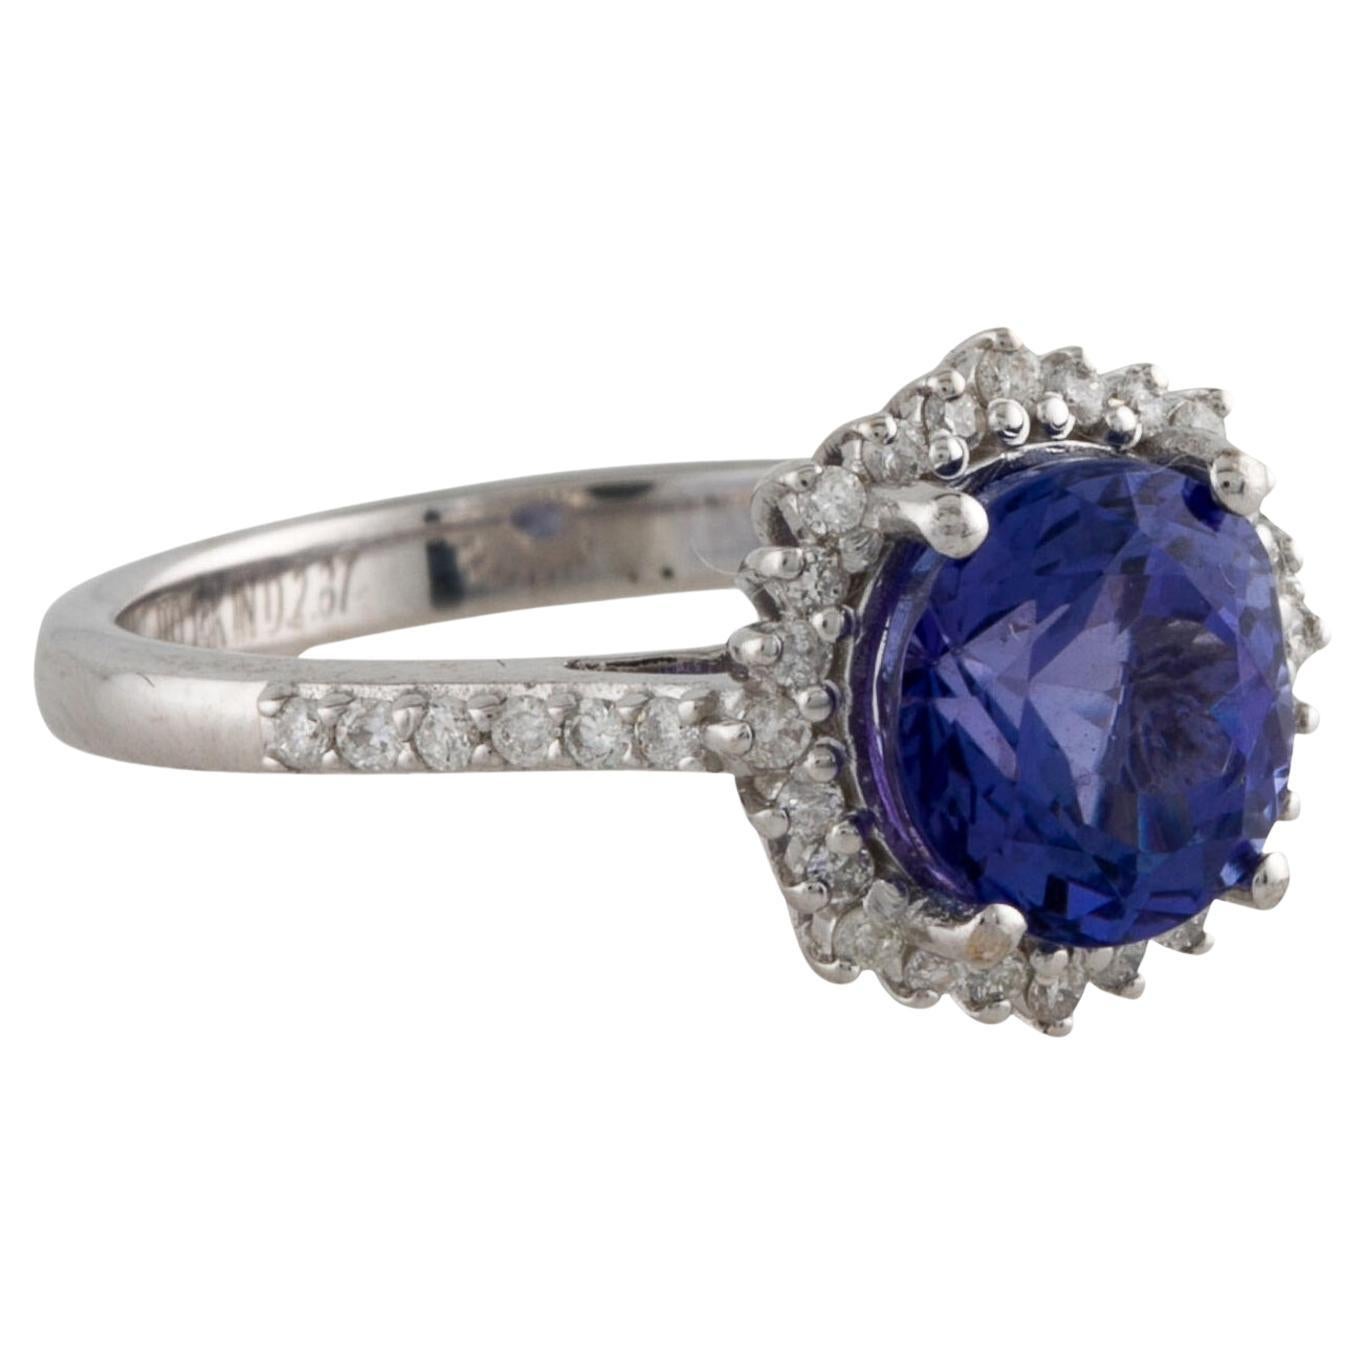 Luxurious 14K White Gold Tanzanite & Diamond Cocktail Ring, 2.25ct Round Faceted